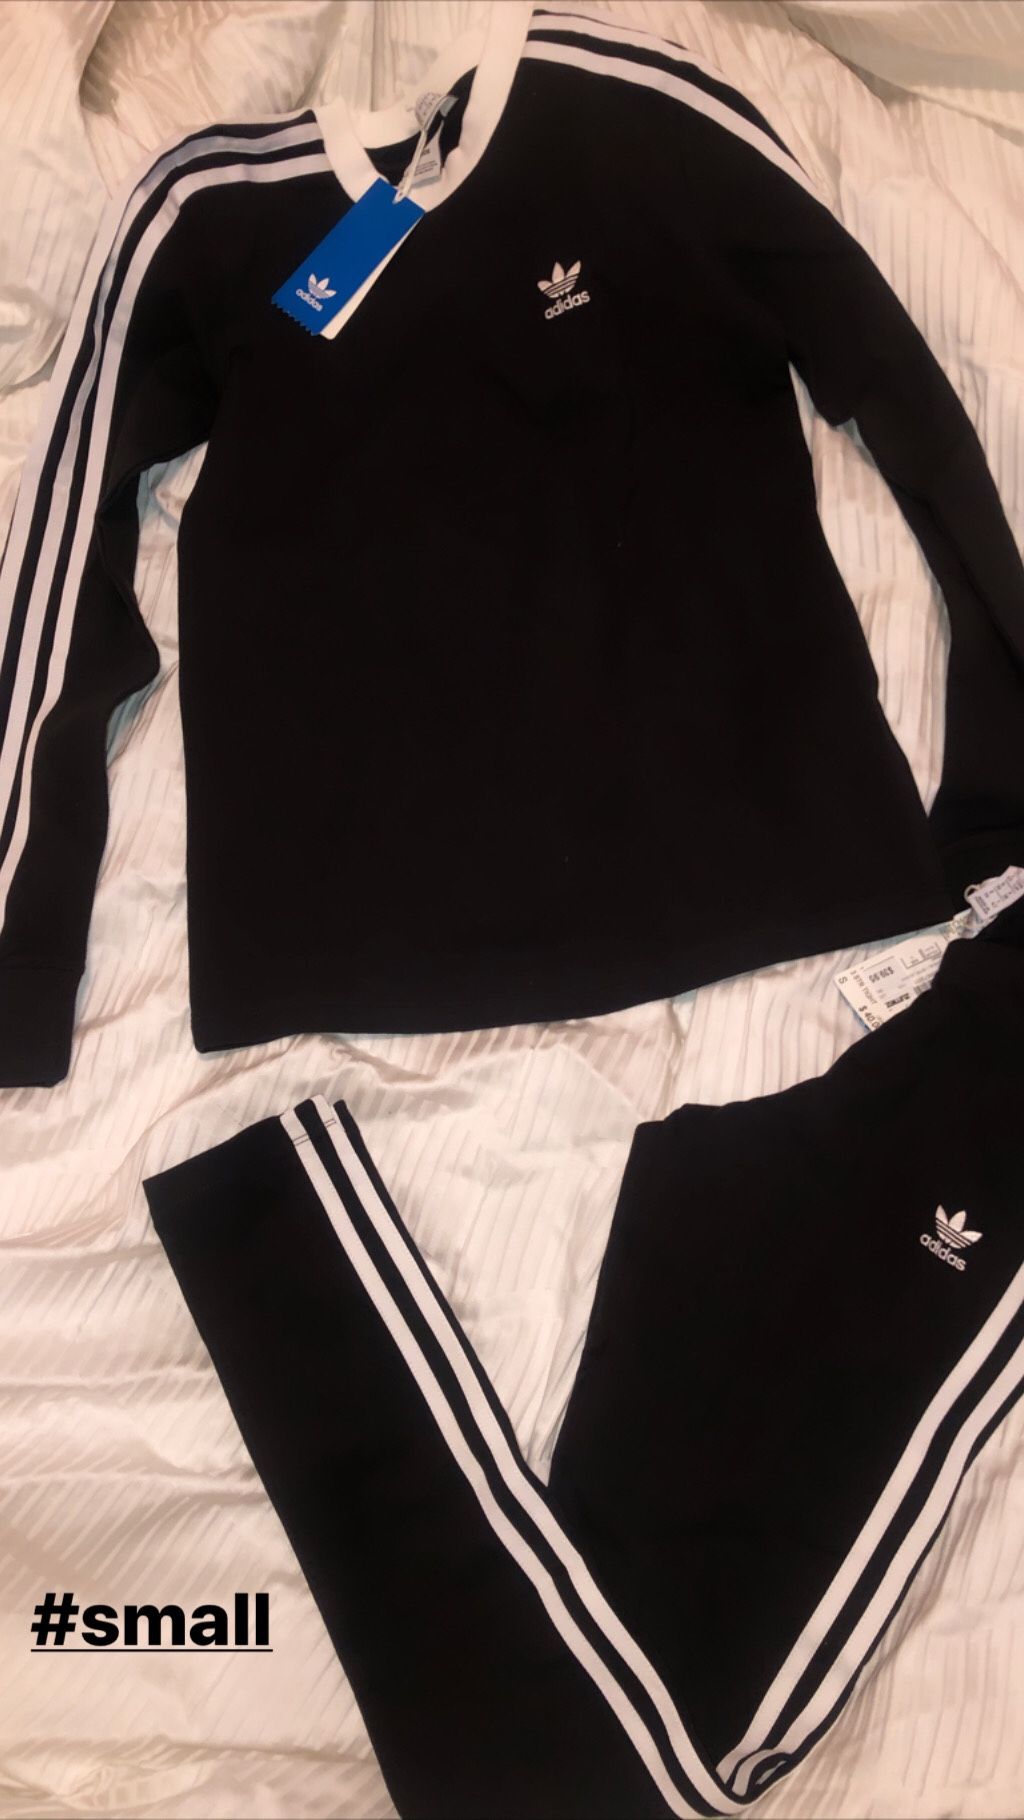 Small women’s adidas outfit